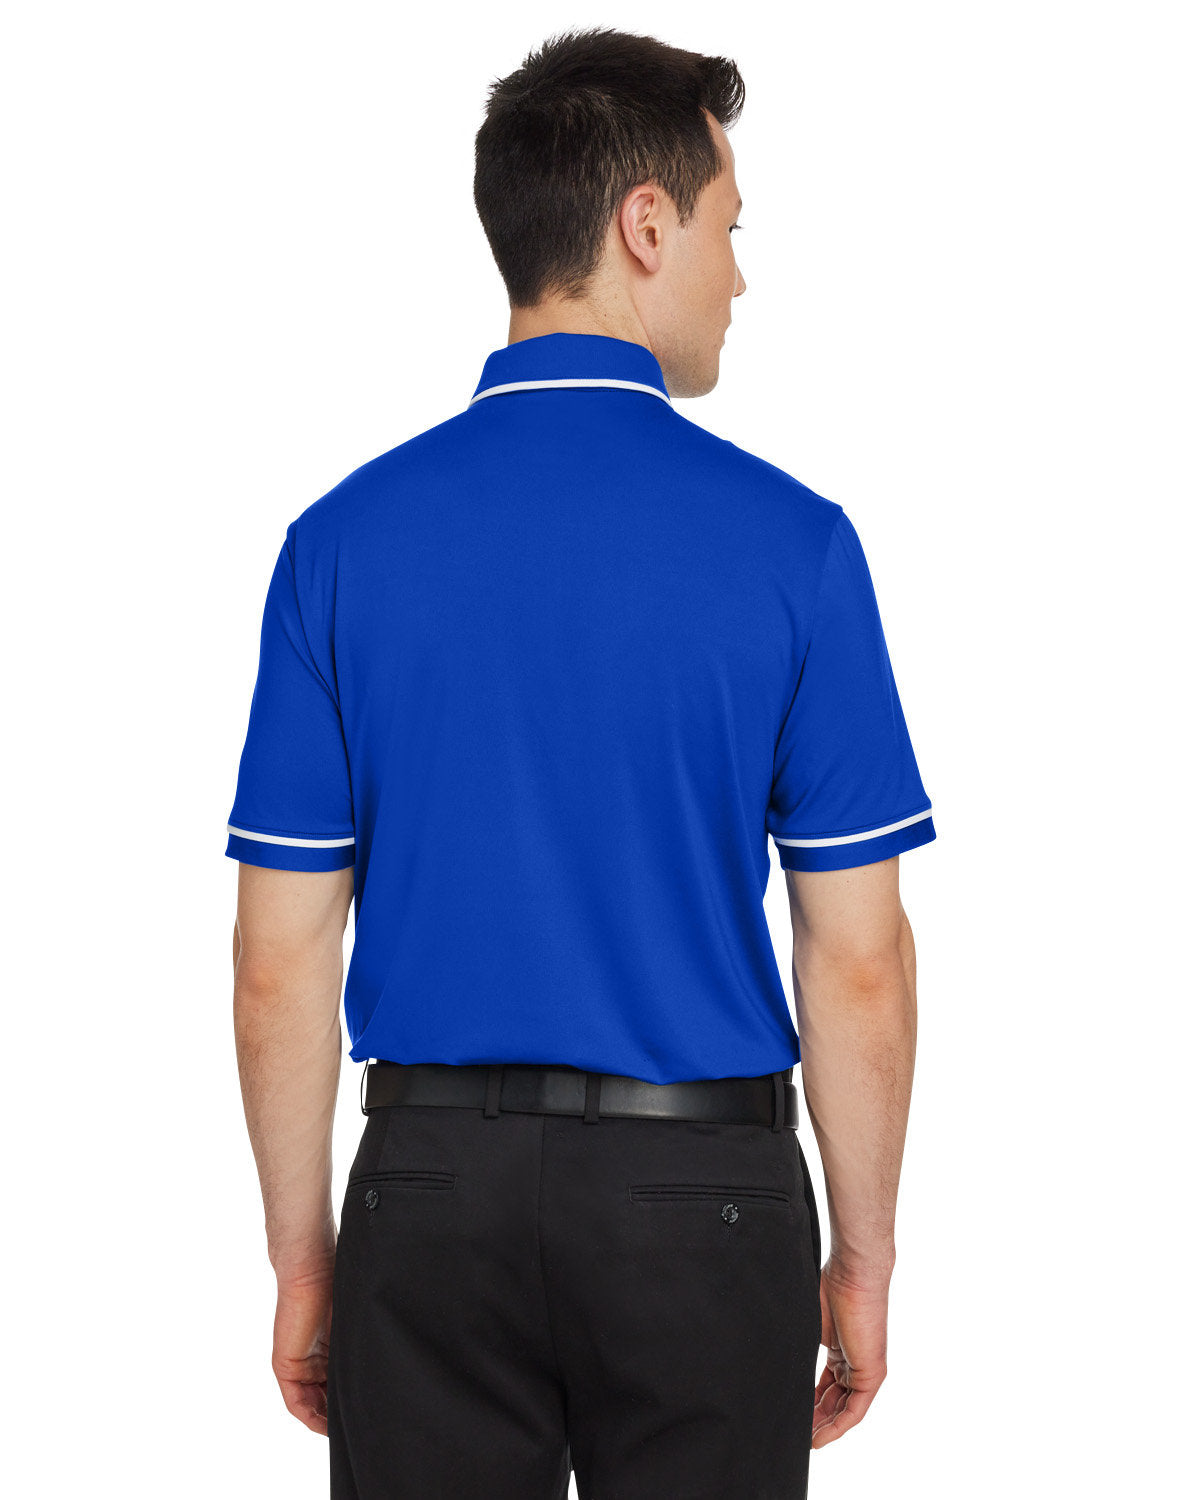 Under Armour Men's Tipped Teams Performance Polo, Royal